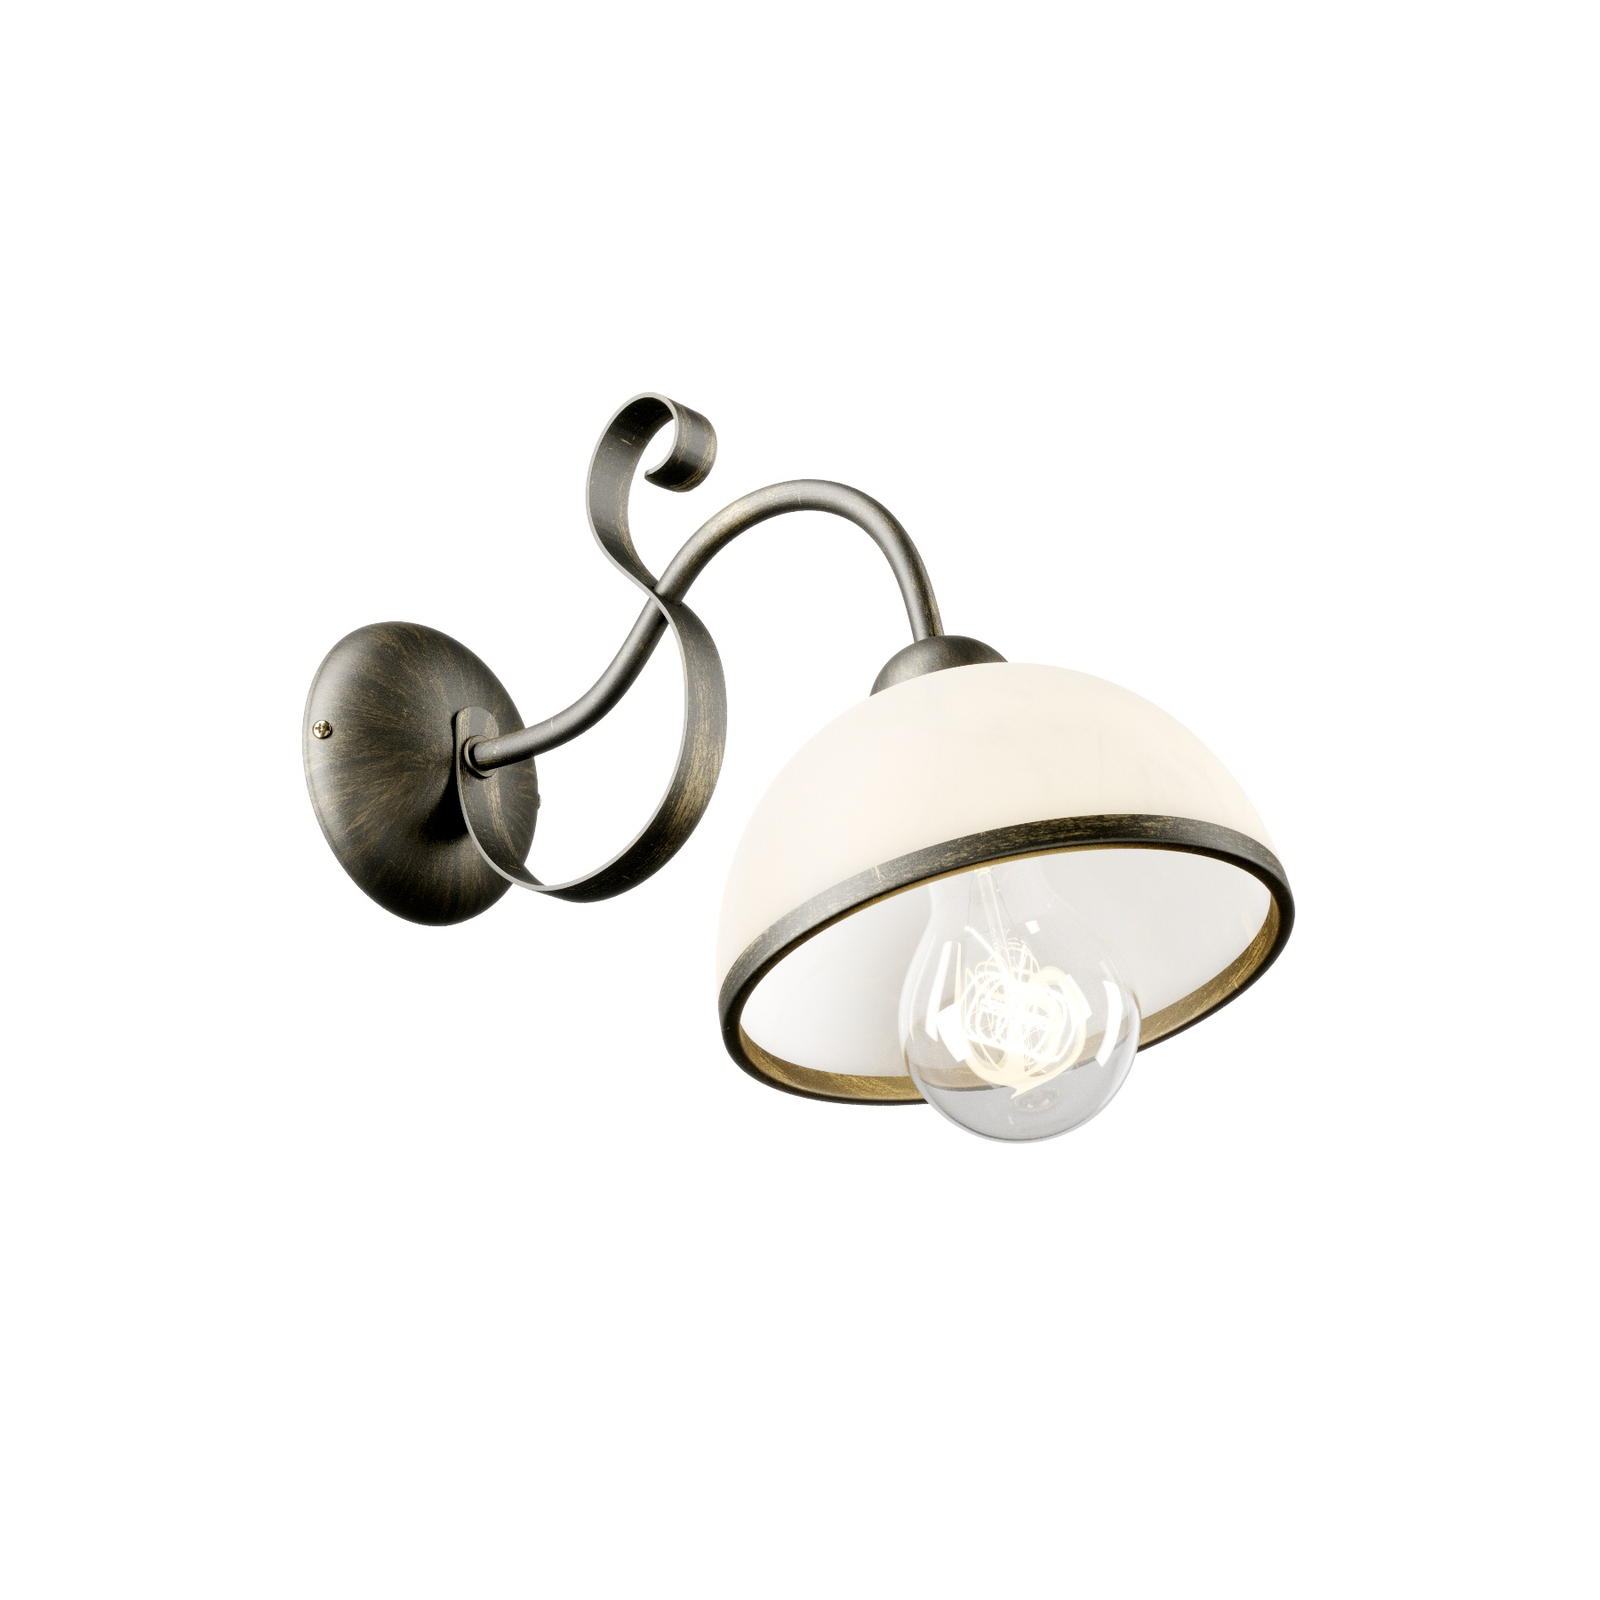 Antica wall light in country house style, 1-bulb